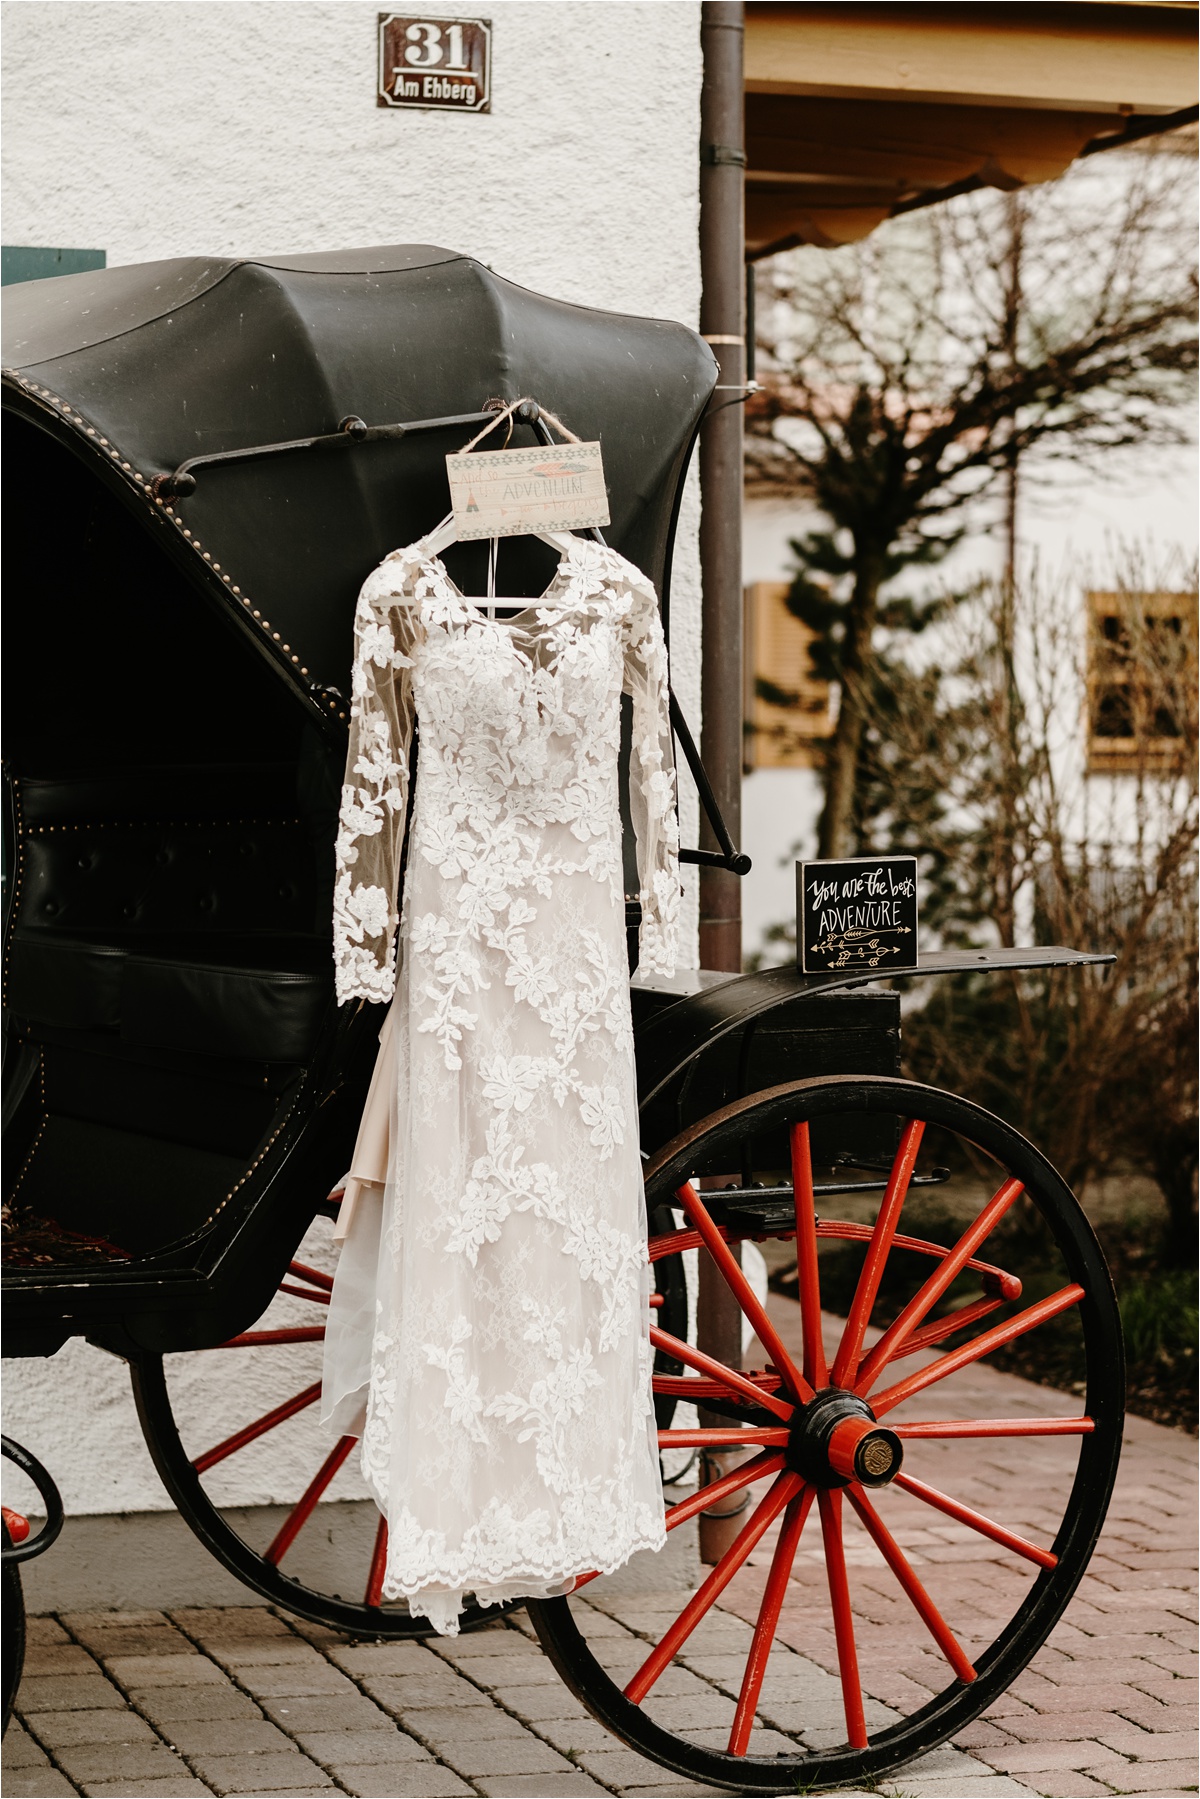 Pronovias wedding dress hangs outside the venue for this LGBT elopement in the Bavarian Alps. Photo by Wild Connections Photography